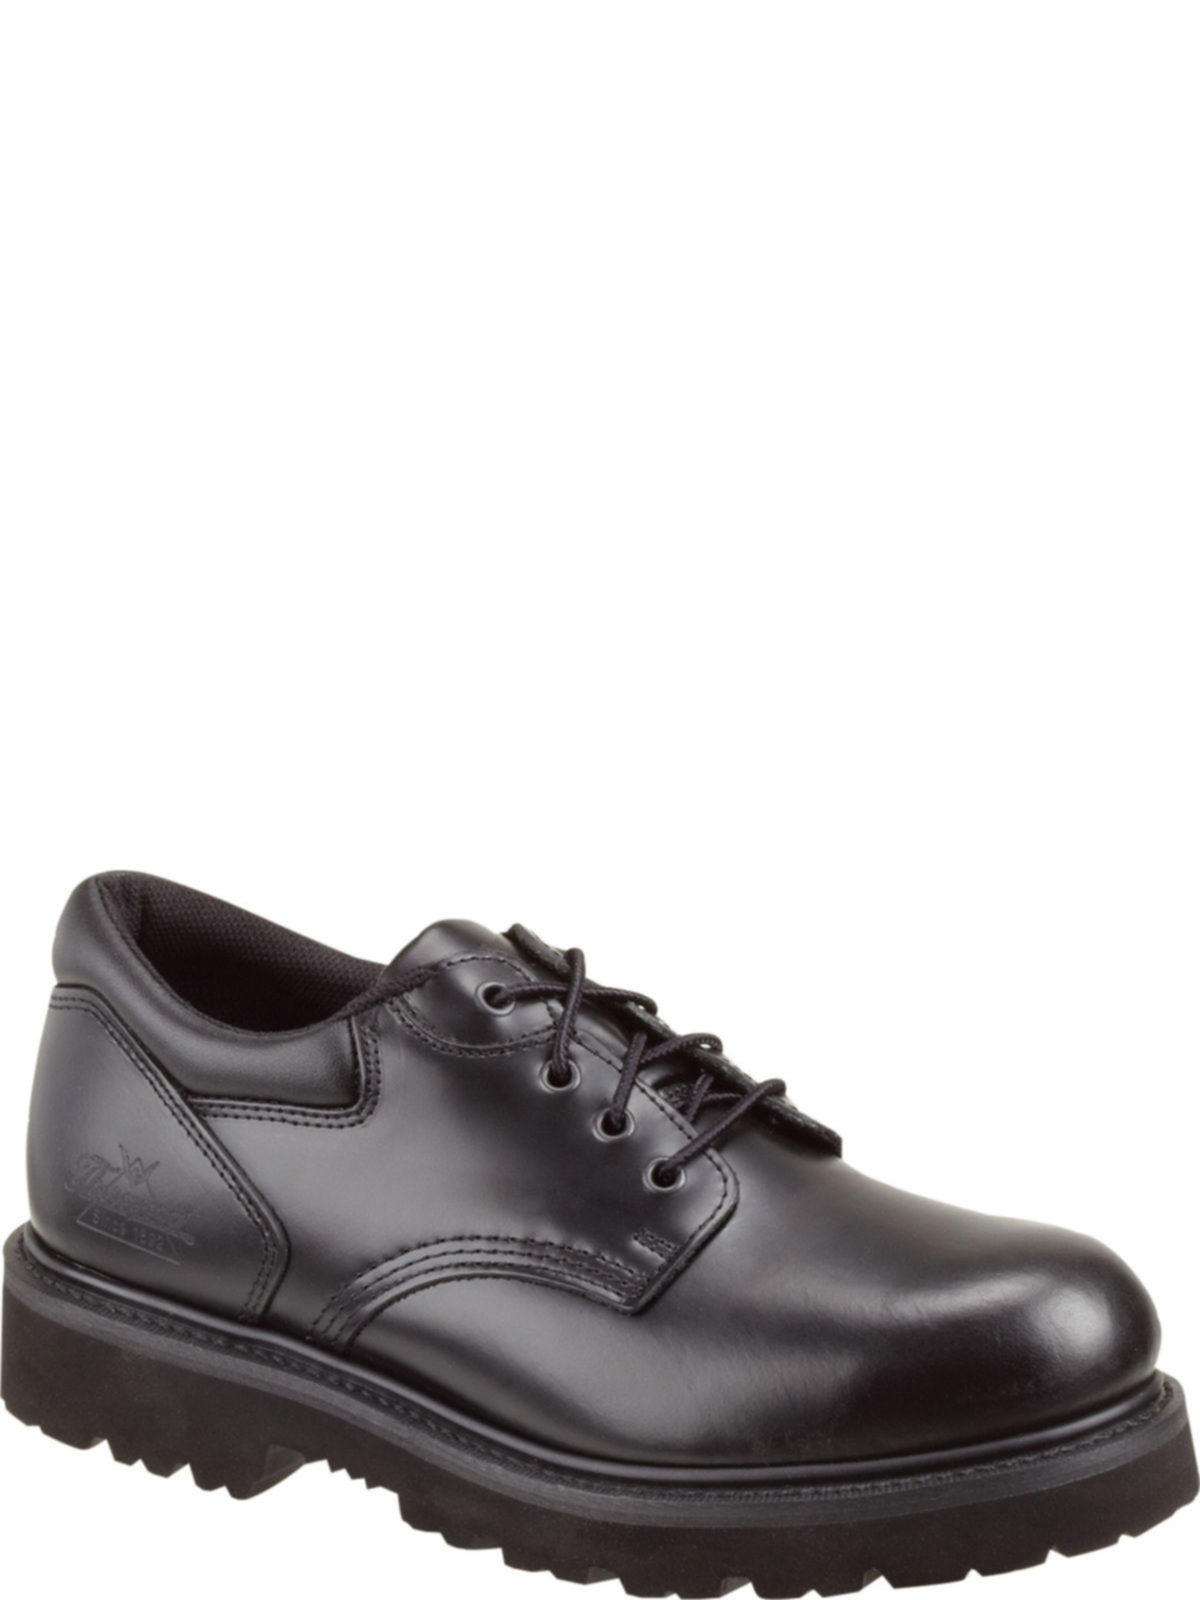 Buy > safety toe oxford shoes > in stock